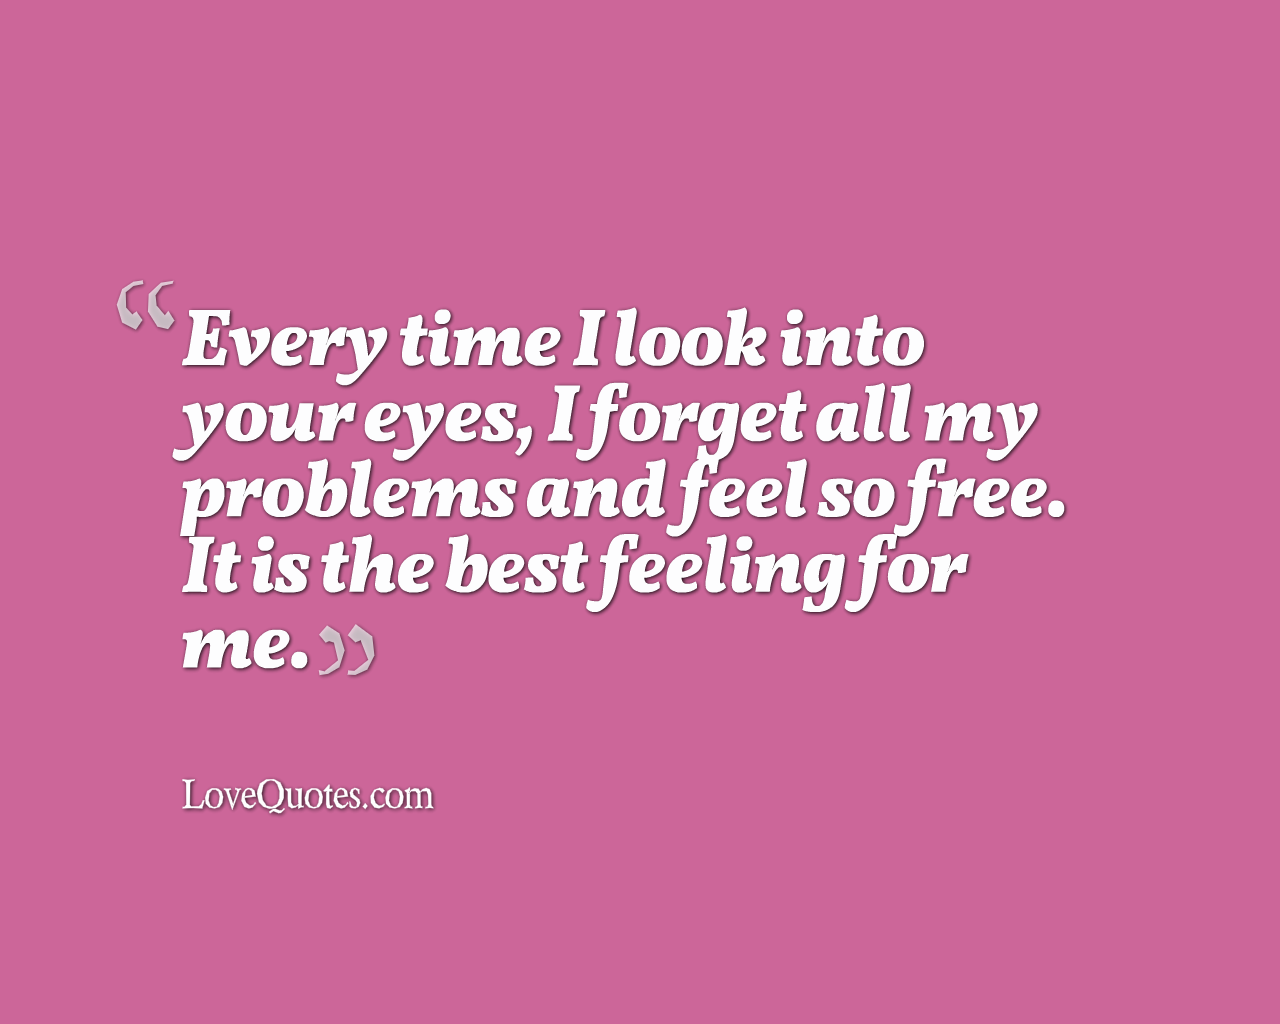 I Feel Free - Love Quotes